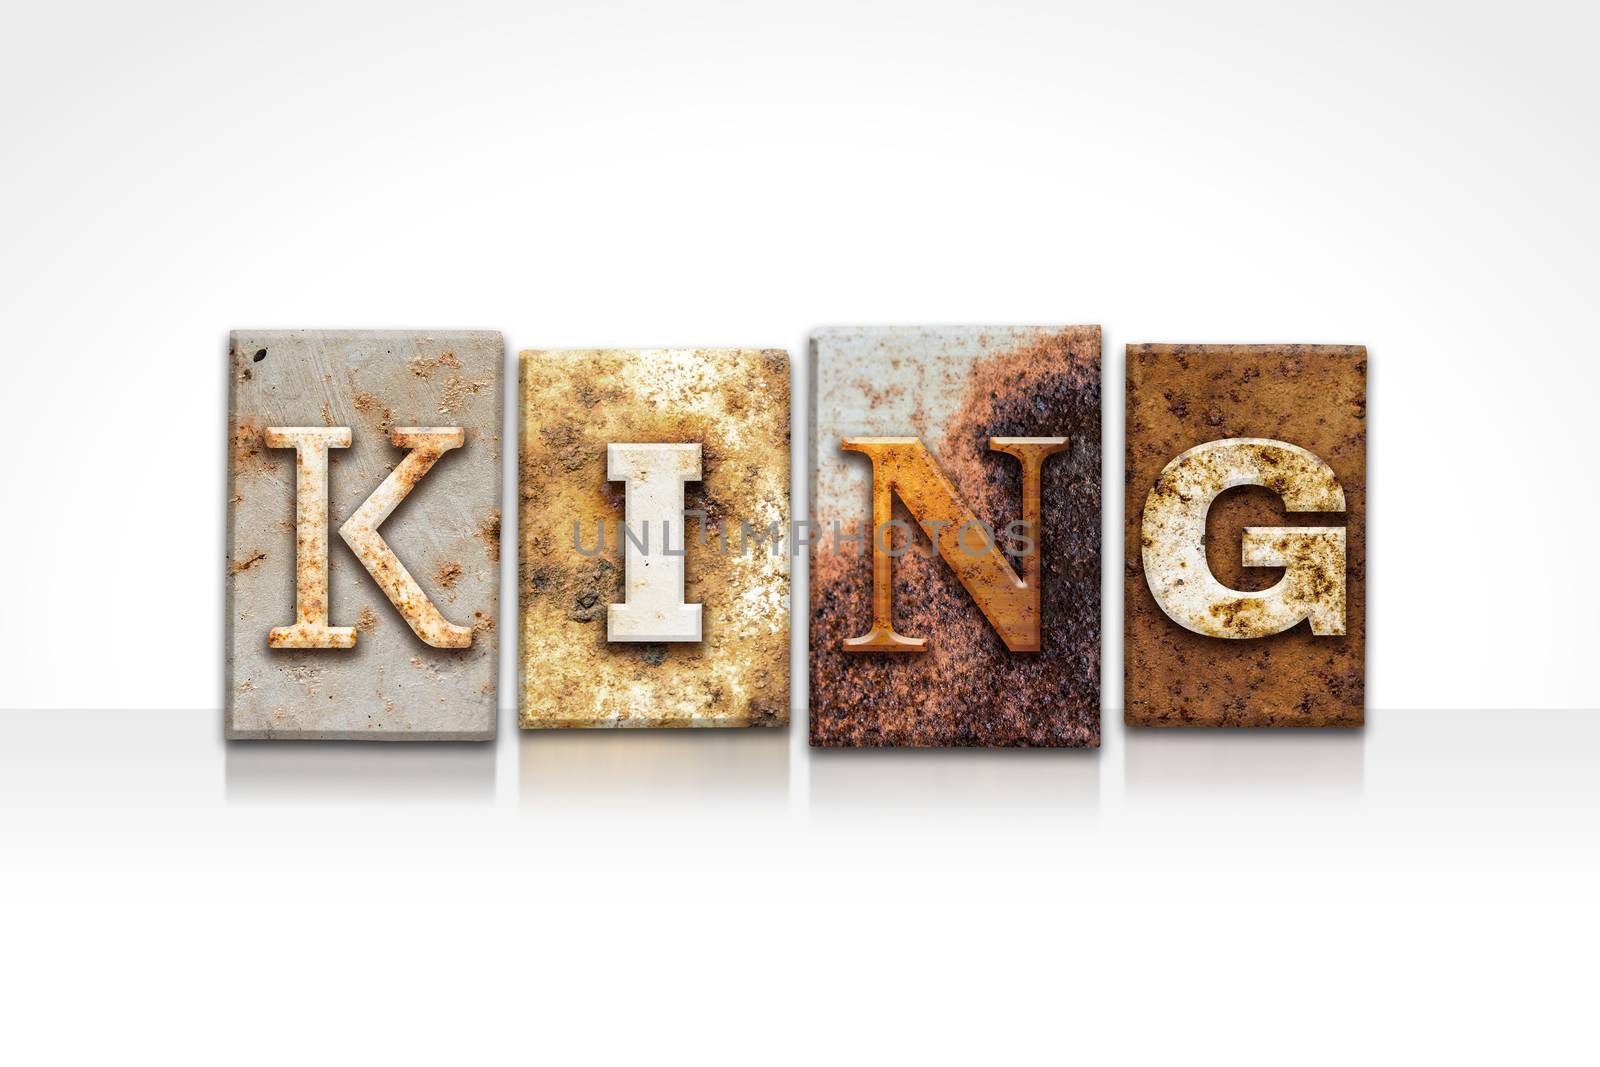 The word "KING" written in rusty metal letterpress type isolated on a white background.